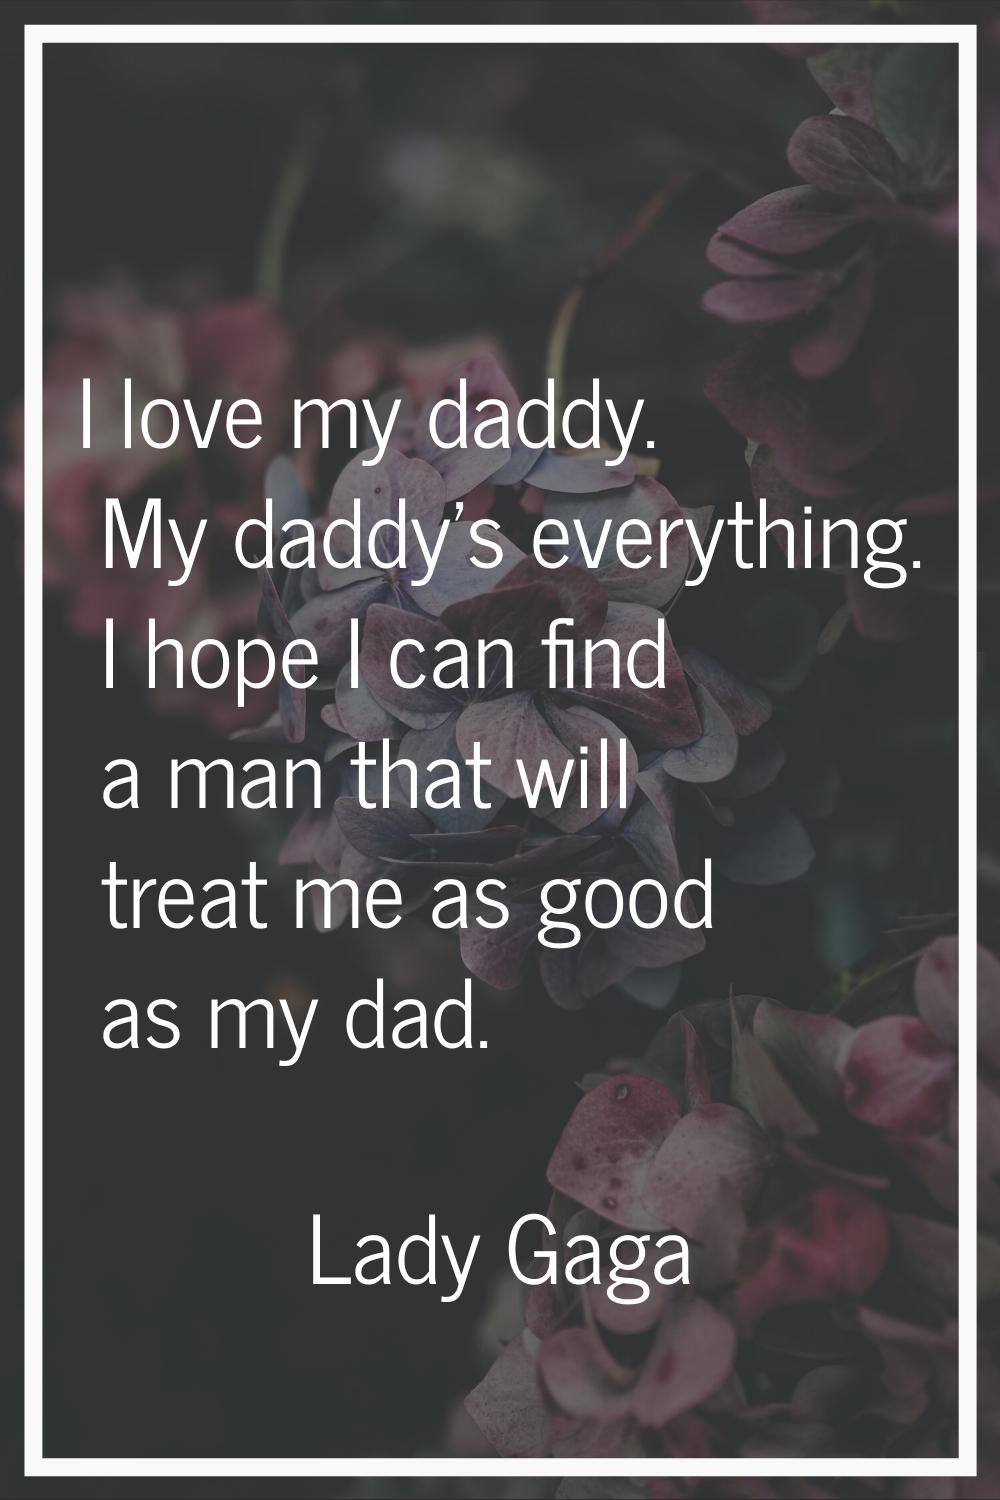 I love my daddy. My daddy's everything. I hope I can find a man that will treat me as good as my da